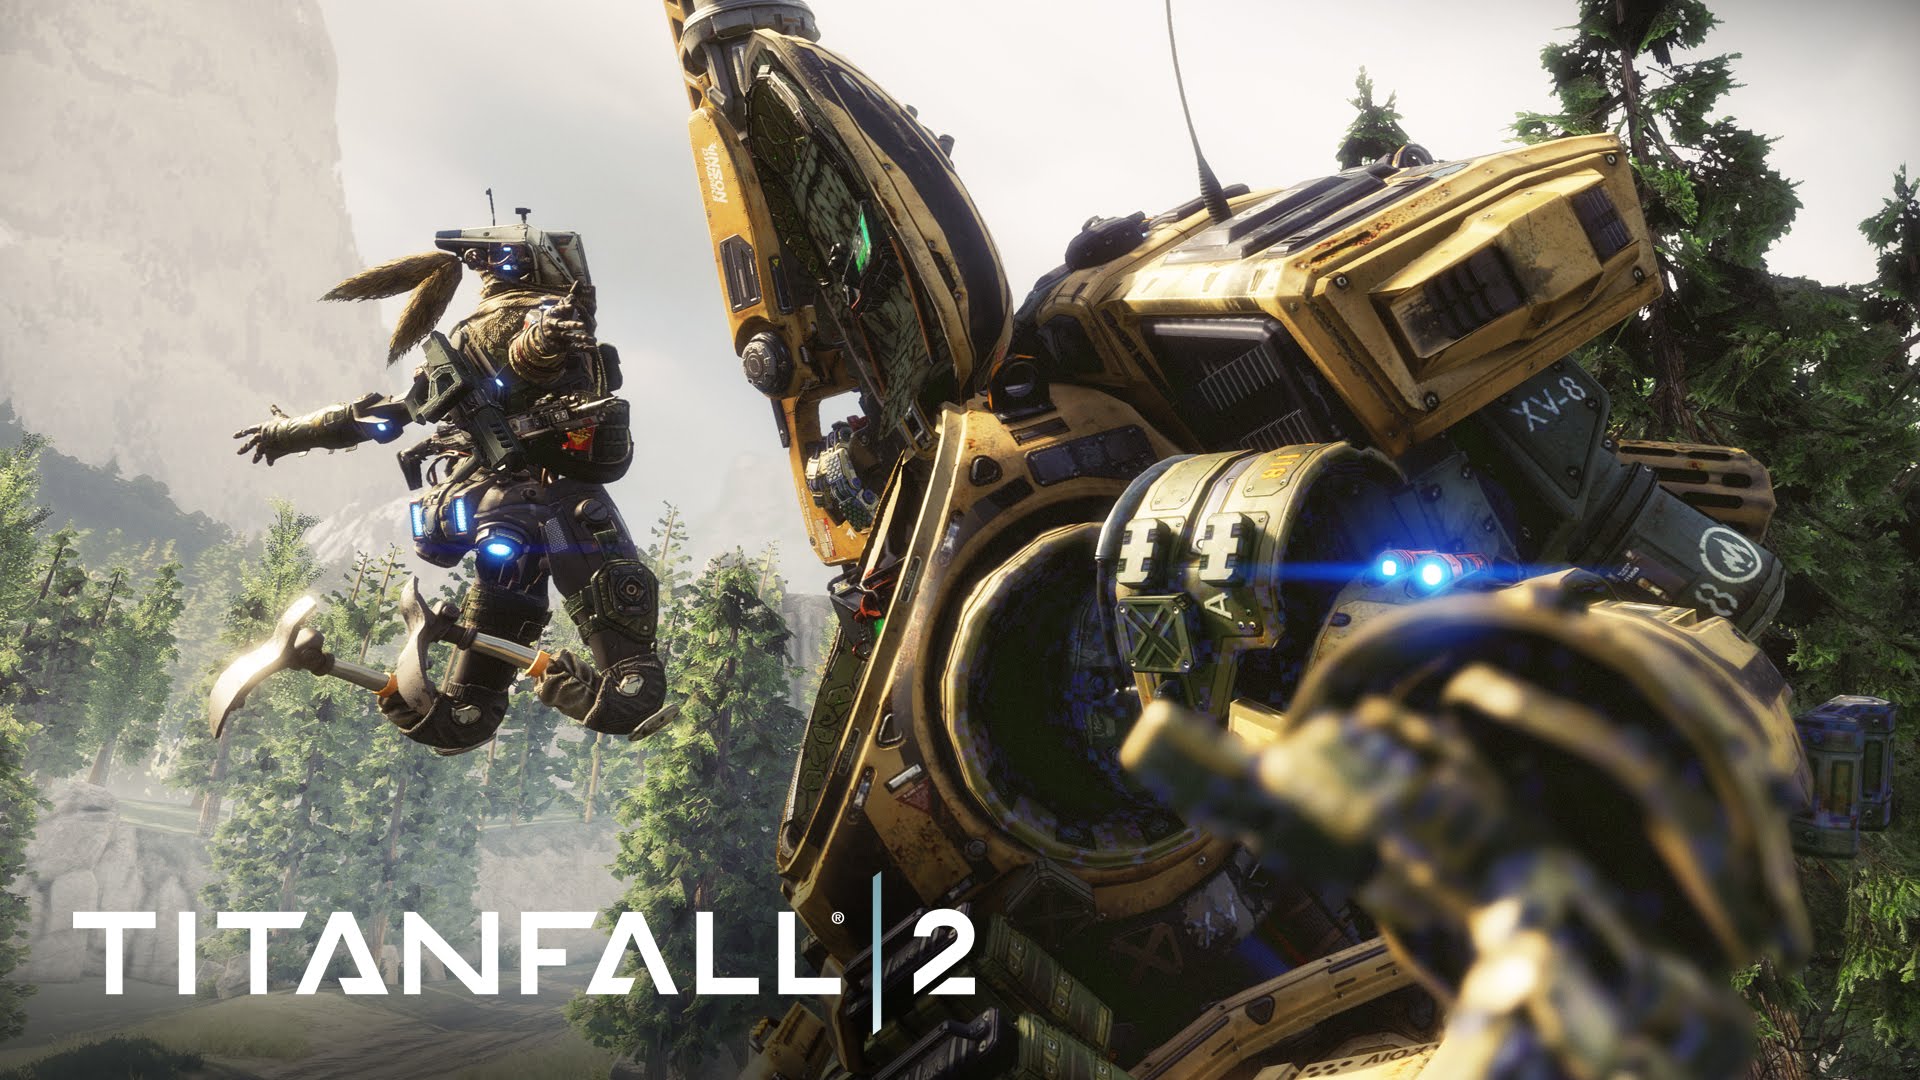 Titanfall 2 Low-Cost